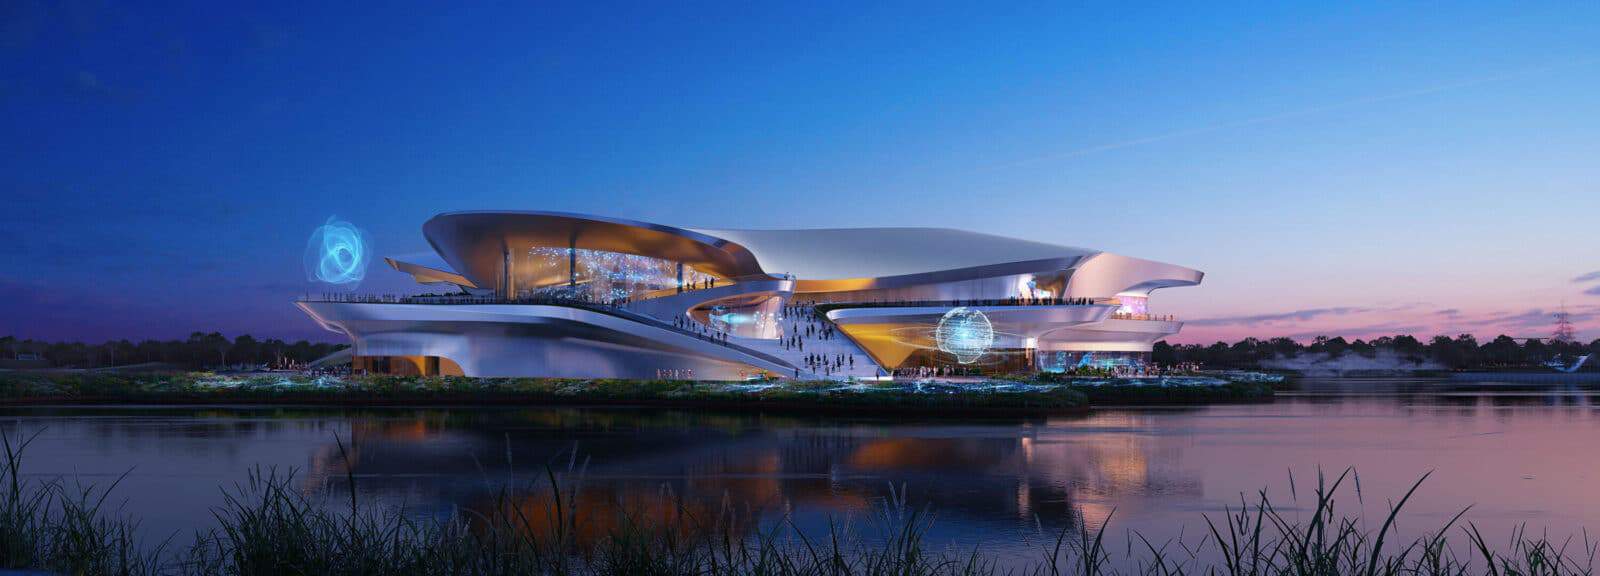 ZHA Chengdu Science Fiction Museum Render by Atchain 3 lores 3000x1080 1